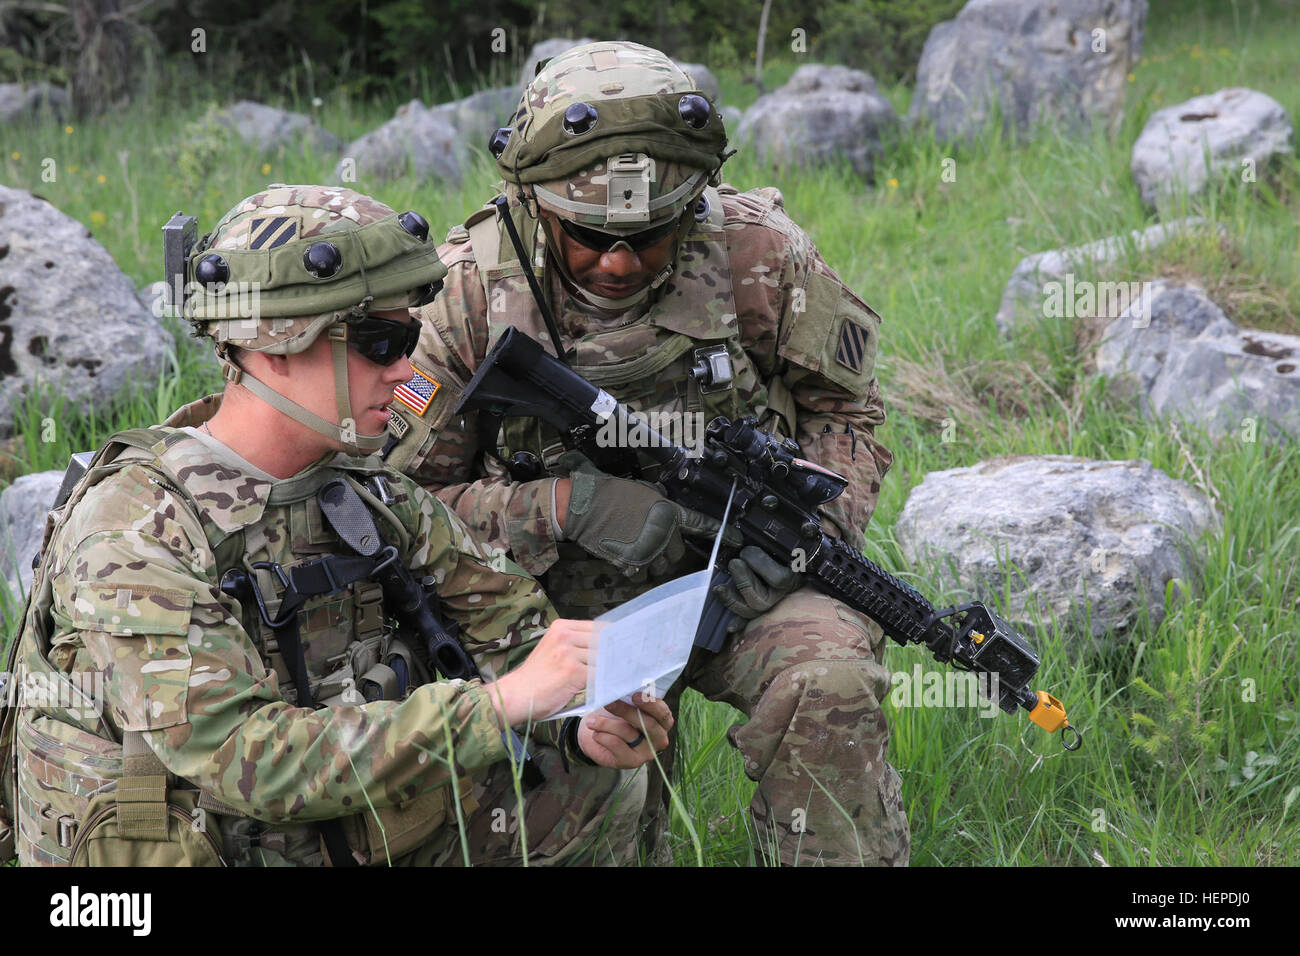 U.S. Army 1st Lt. John Gibson, left, and U.S. Army Staff Sgt. Elijah Turner, right, of Echo Company, 4th Battalion, 3rd Aviation Regiment, 3rd Combat Aviation Brigade, 3rd Infantry Division discus terrain association on a map during exercise Combined Resolve IV at the U.S. Army’s Joint Multinational Readiness Center in Hohenfels, Germany, May 23, 2015.  Combined Resolve IV is an Army Europe directed exercise training a multinational brigade and enhancing interoperability with allies and partner nations. Combined Resolve trains on unified land operations against a complex threat while improving Stock Photo